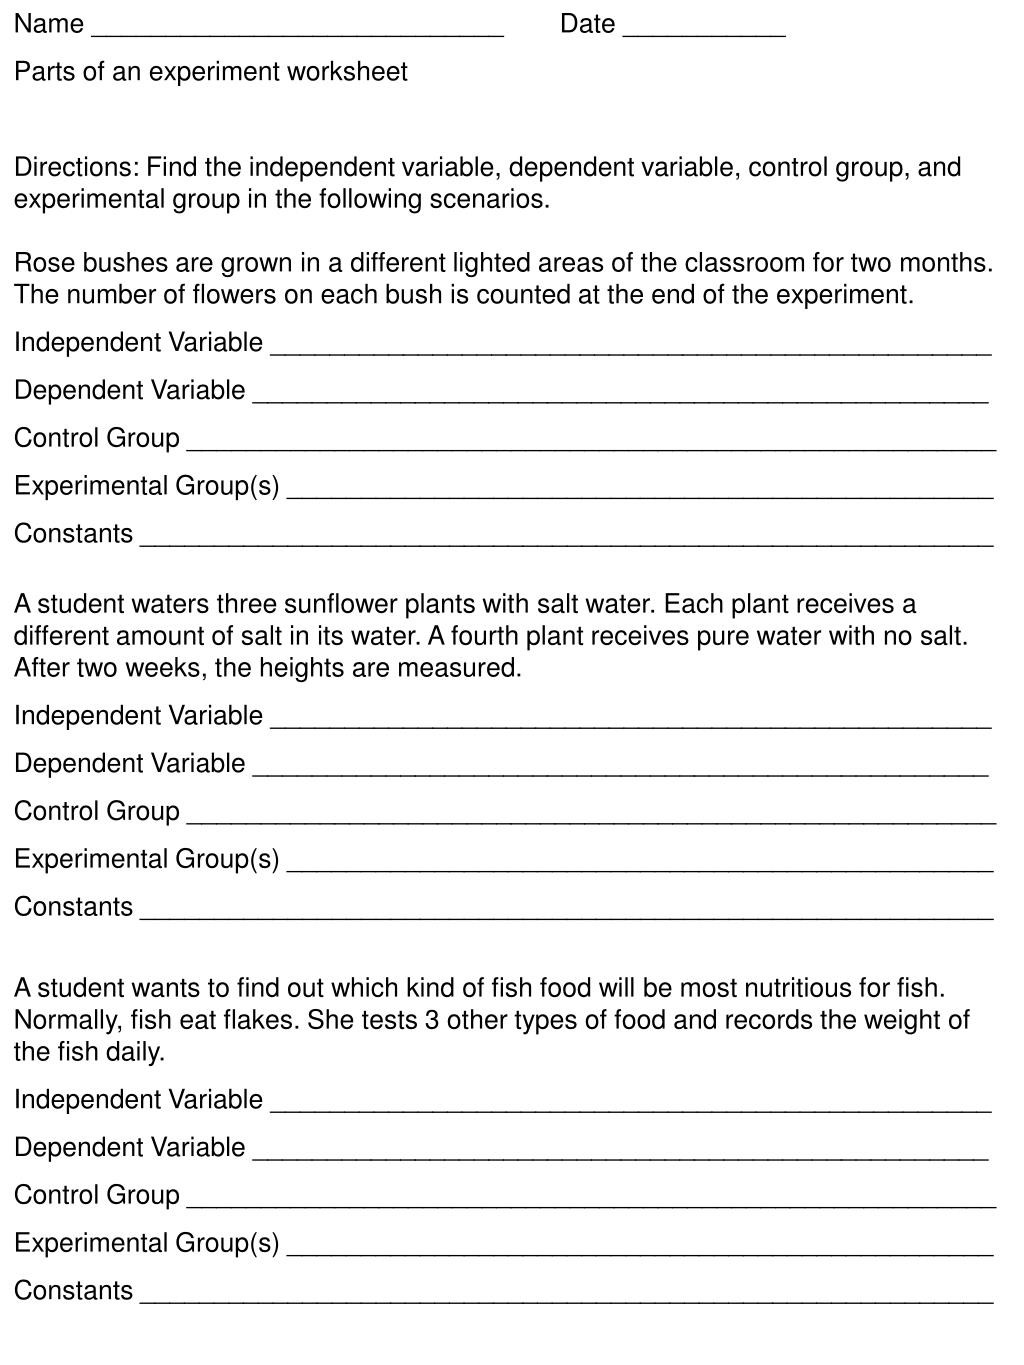 Dependent and Independent Variables Worksheet Ppt Name Date Parts Of An Experiment Worksheet